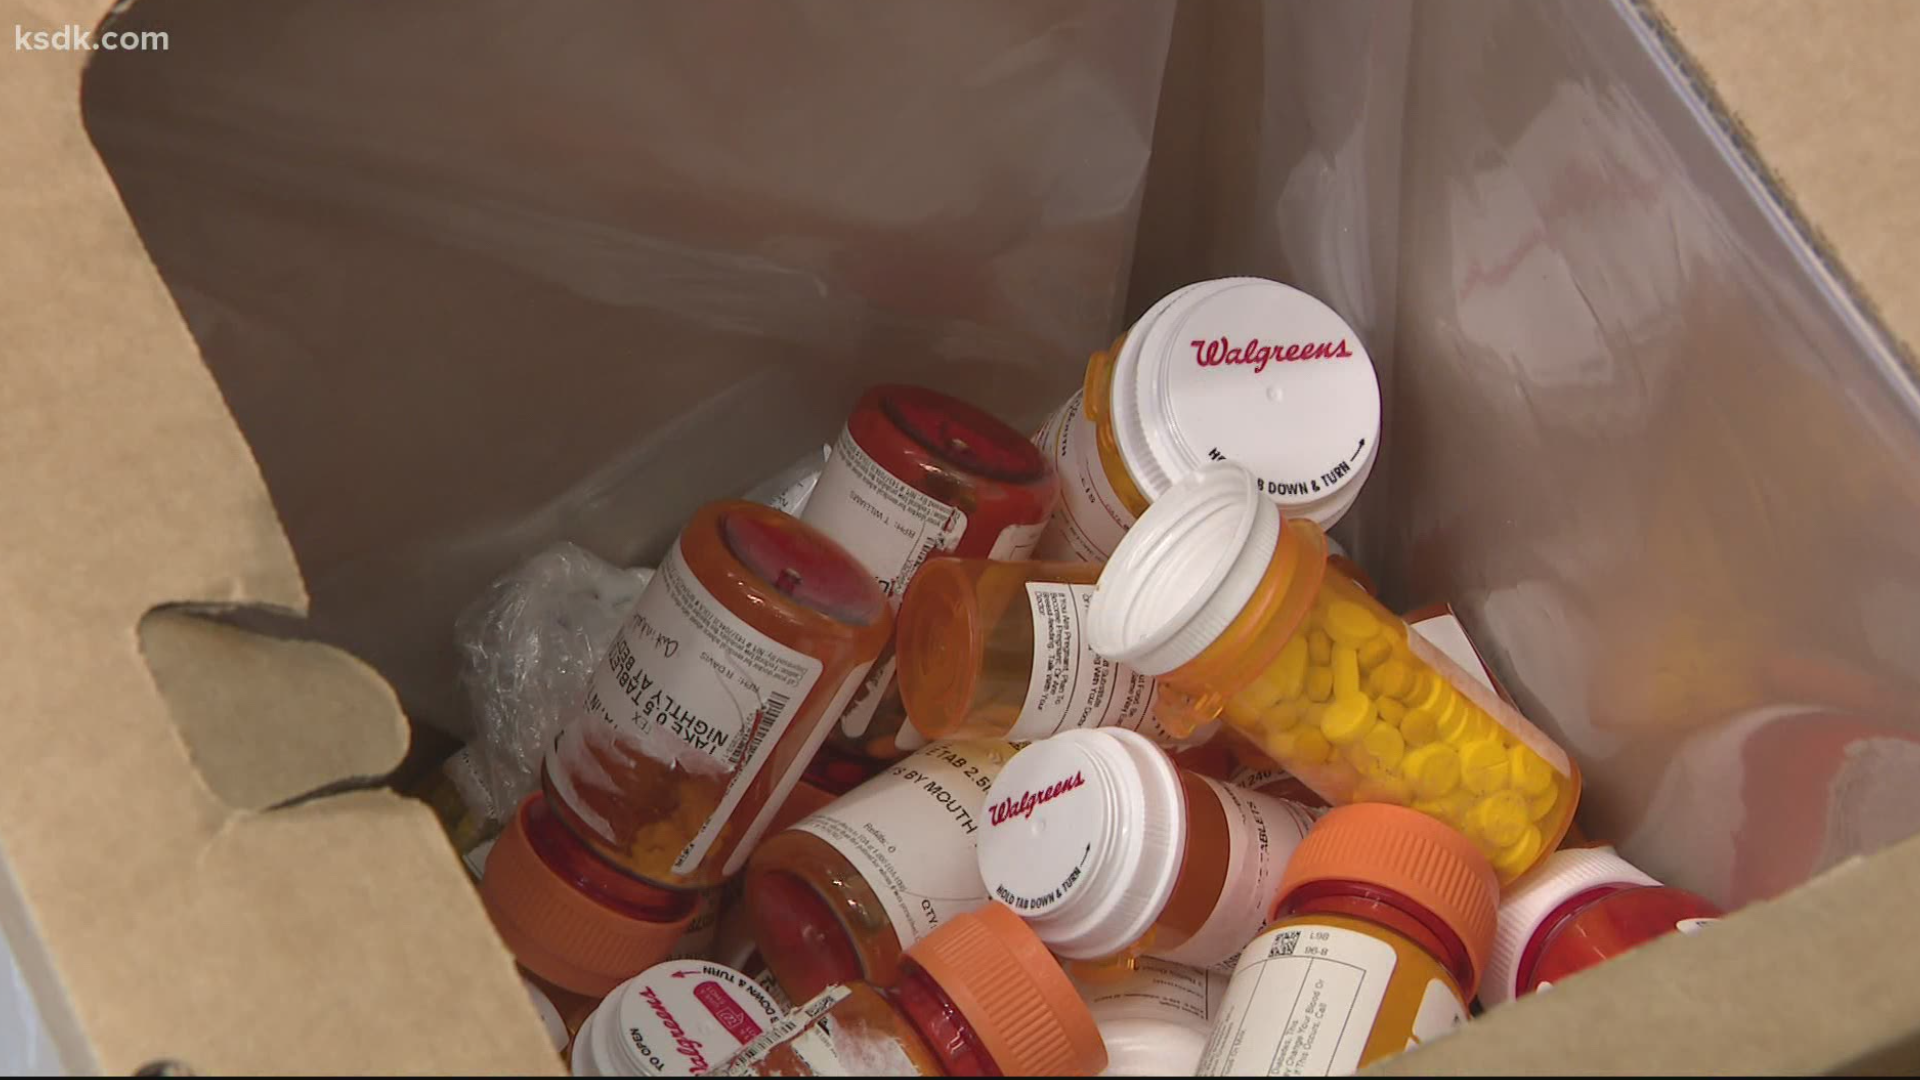 April 27 is National Prescription Drug Take Back Day. Several law enforcement agencies across the Bi-state will be hosting events to take back your unused drugs.